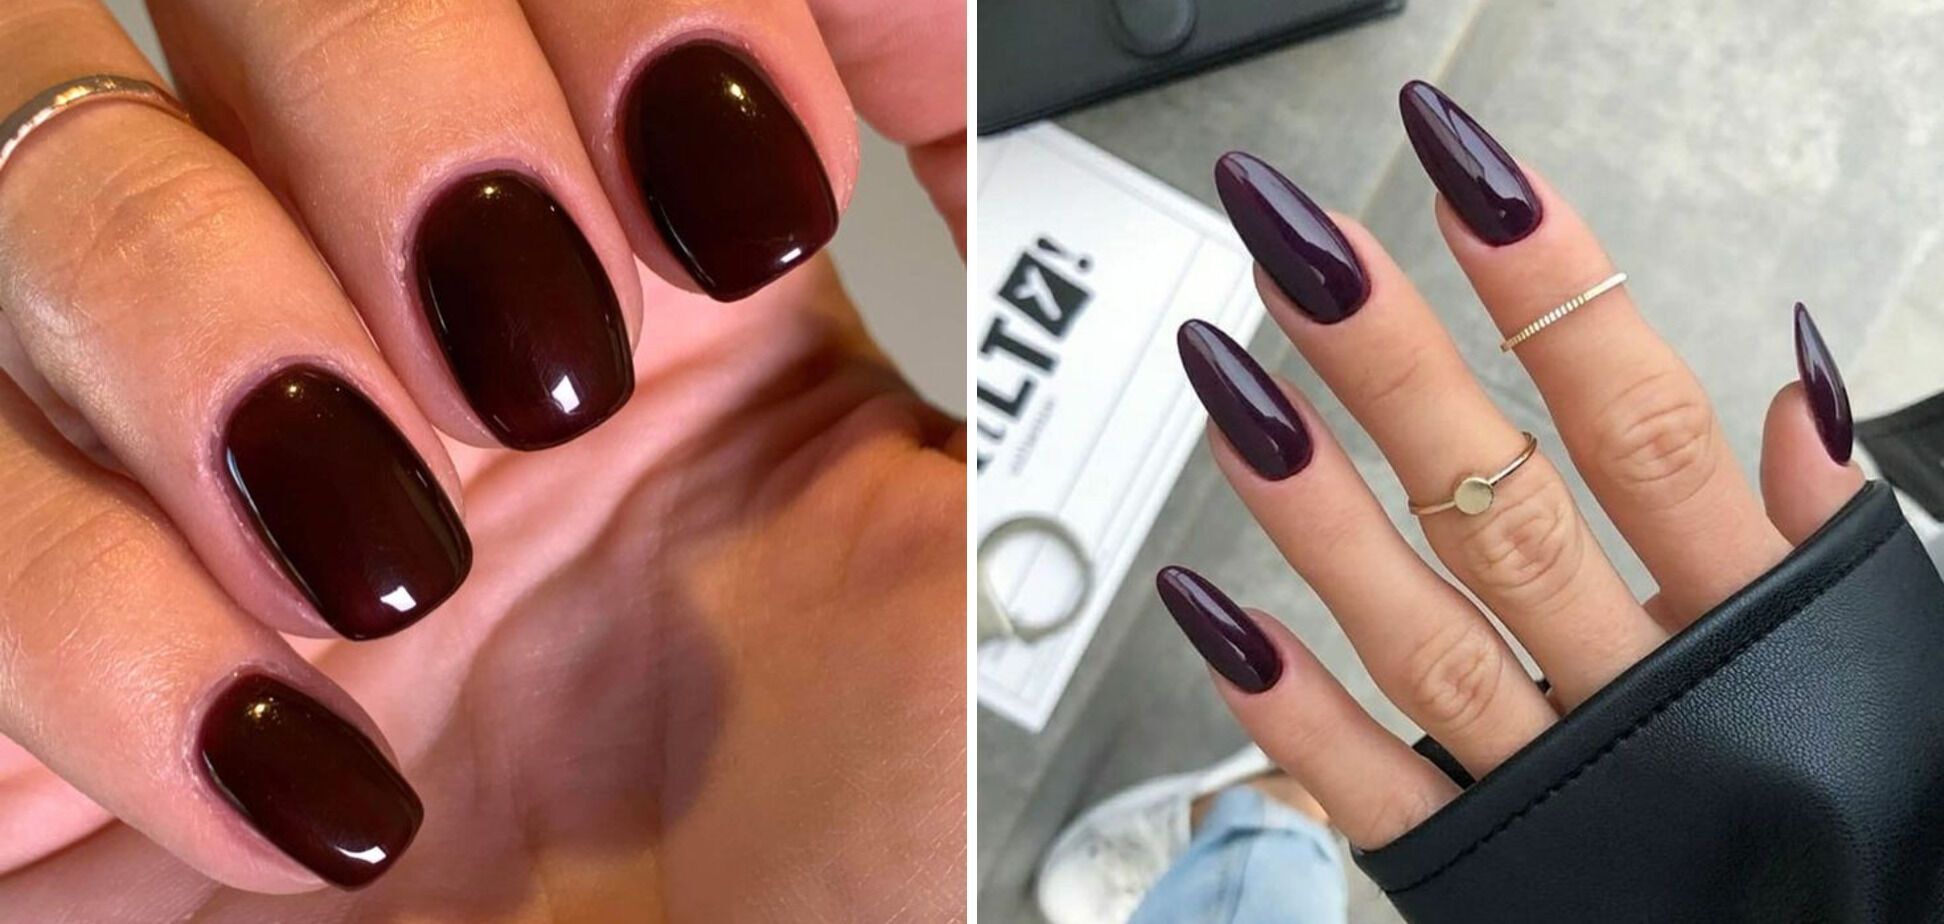 Forget about trends: 5 classic manicure colors that will create a Christmas mood